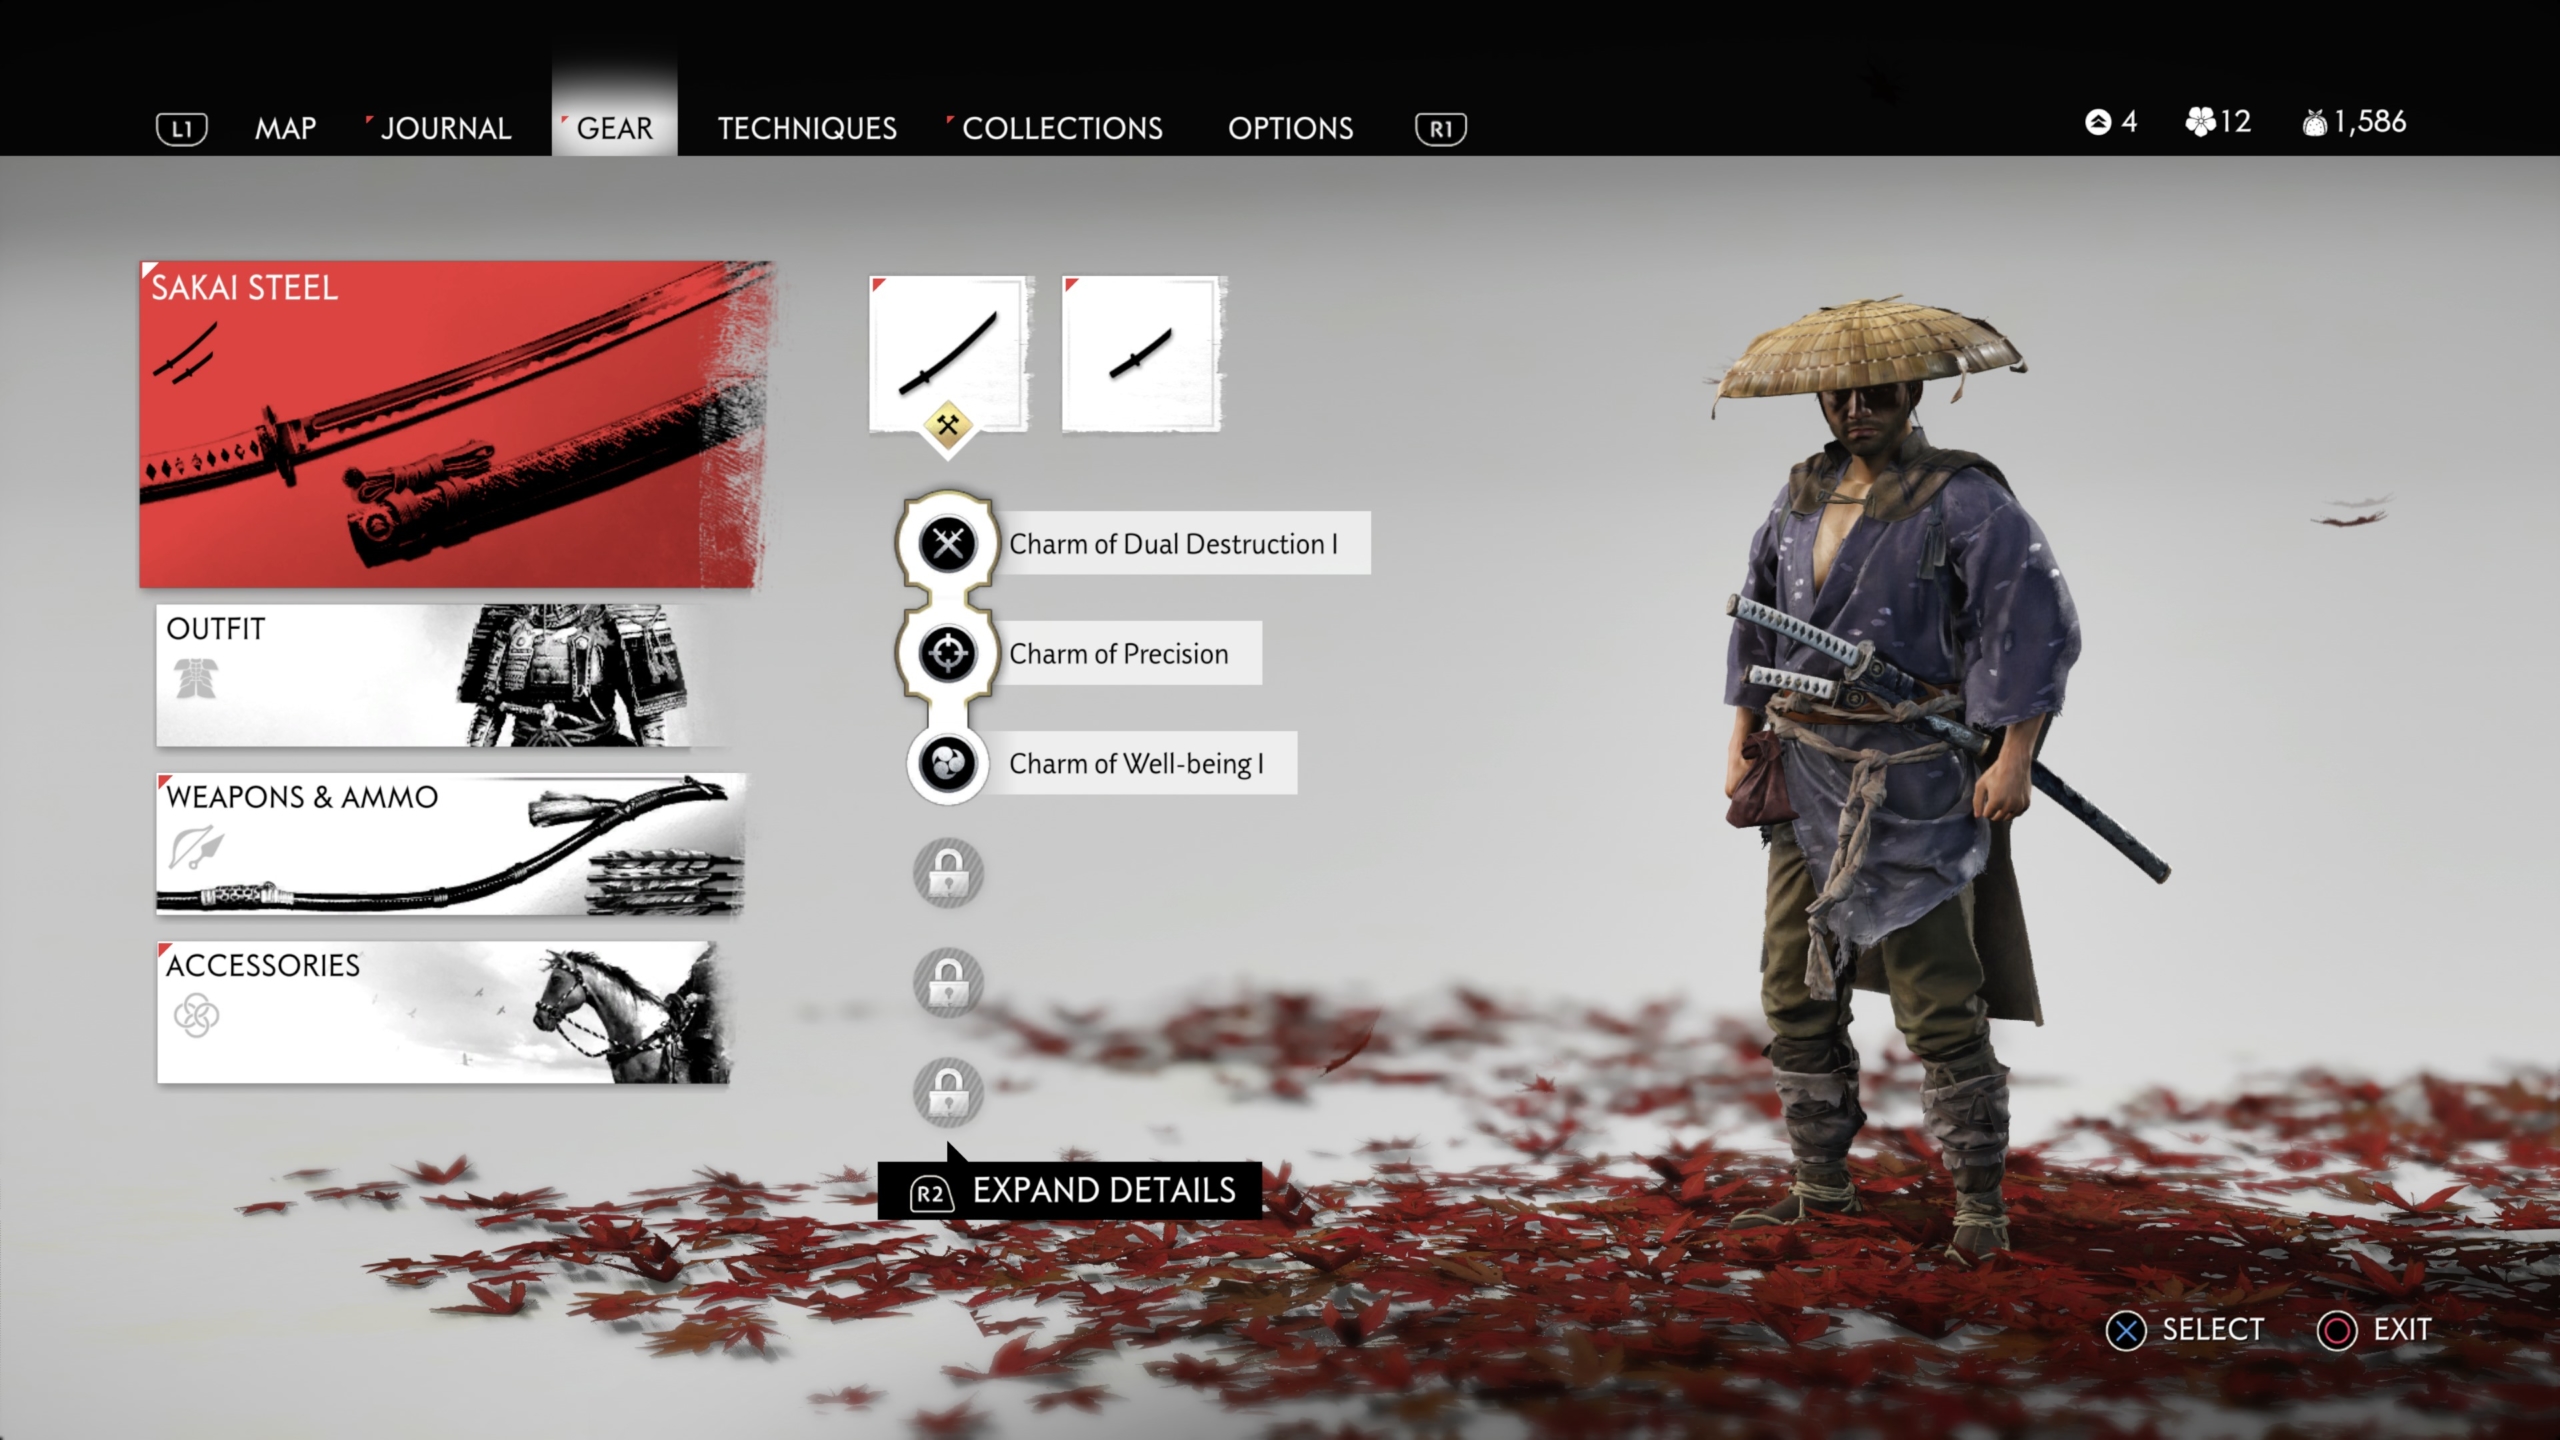 Ghost of Tsushima Receives Details on Combat, Stealth, Open World